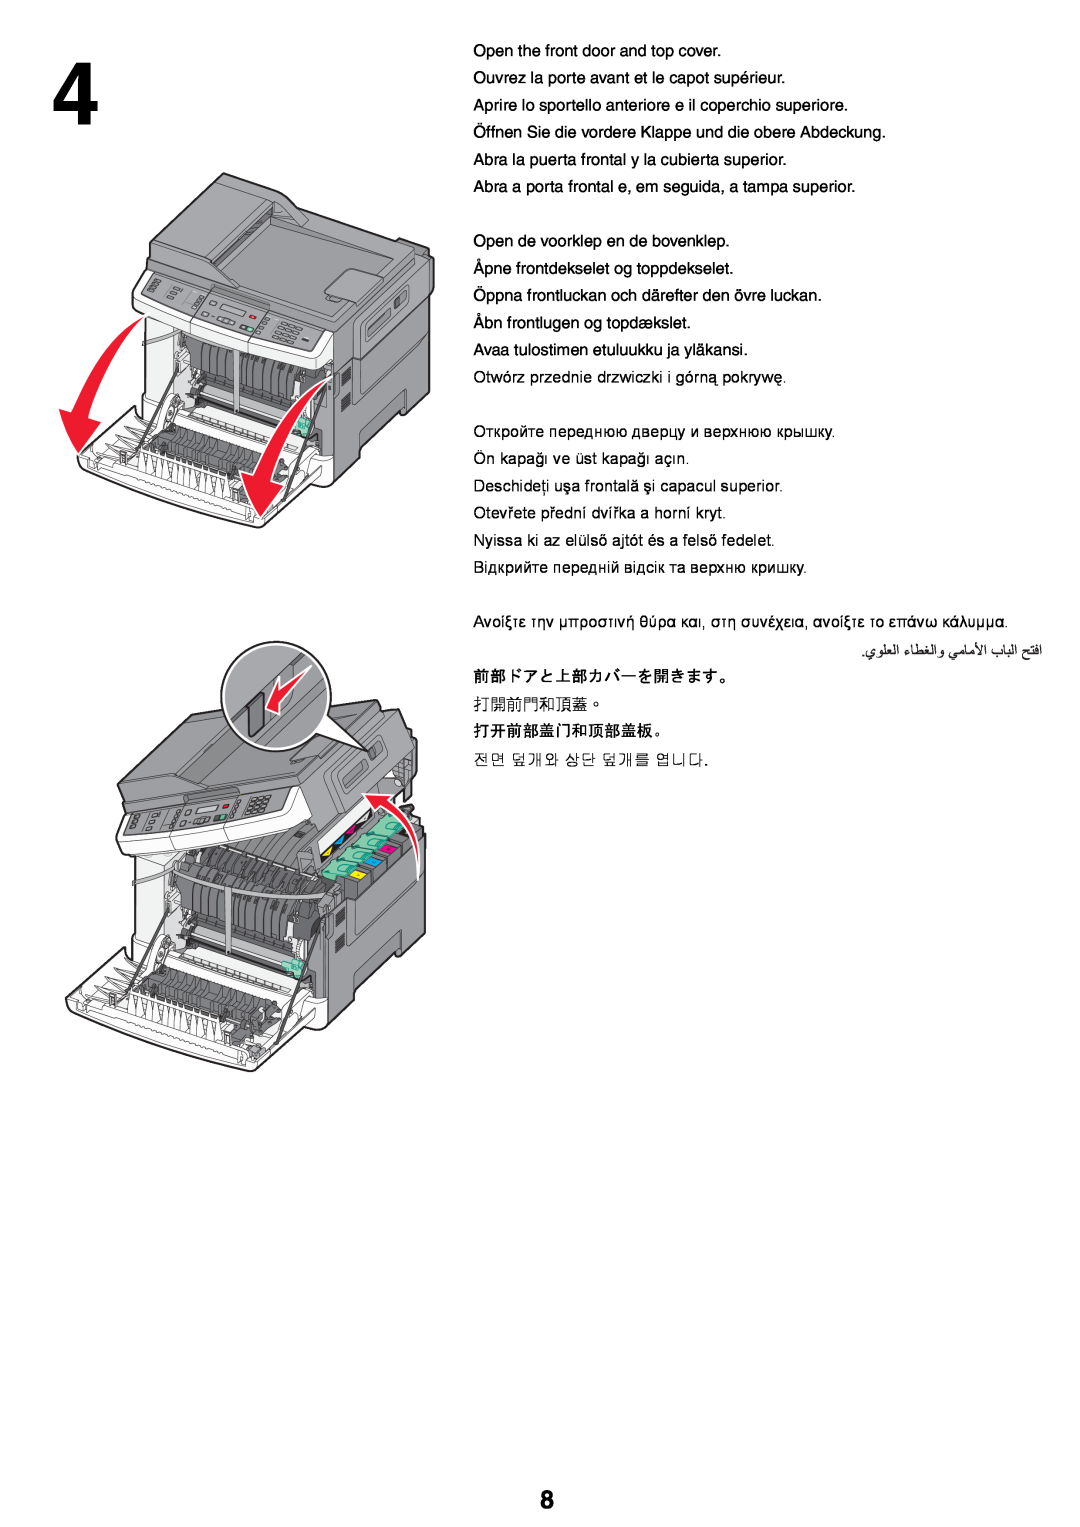 Lexmark X54x setup guide Open the front door and top cover 